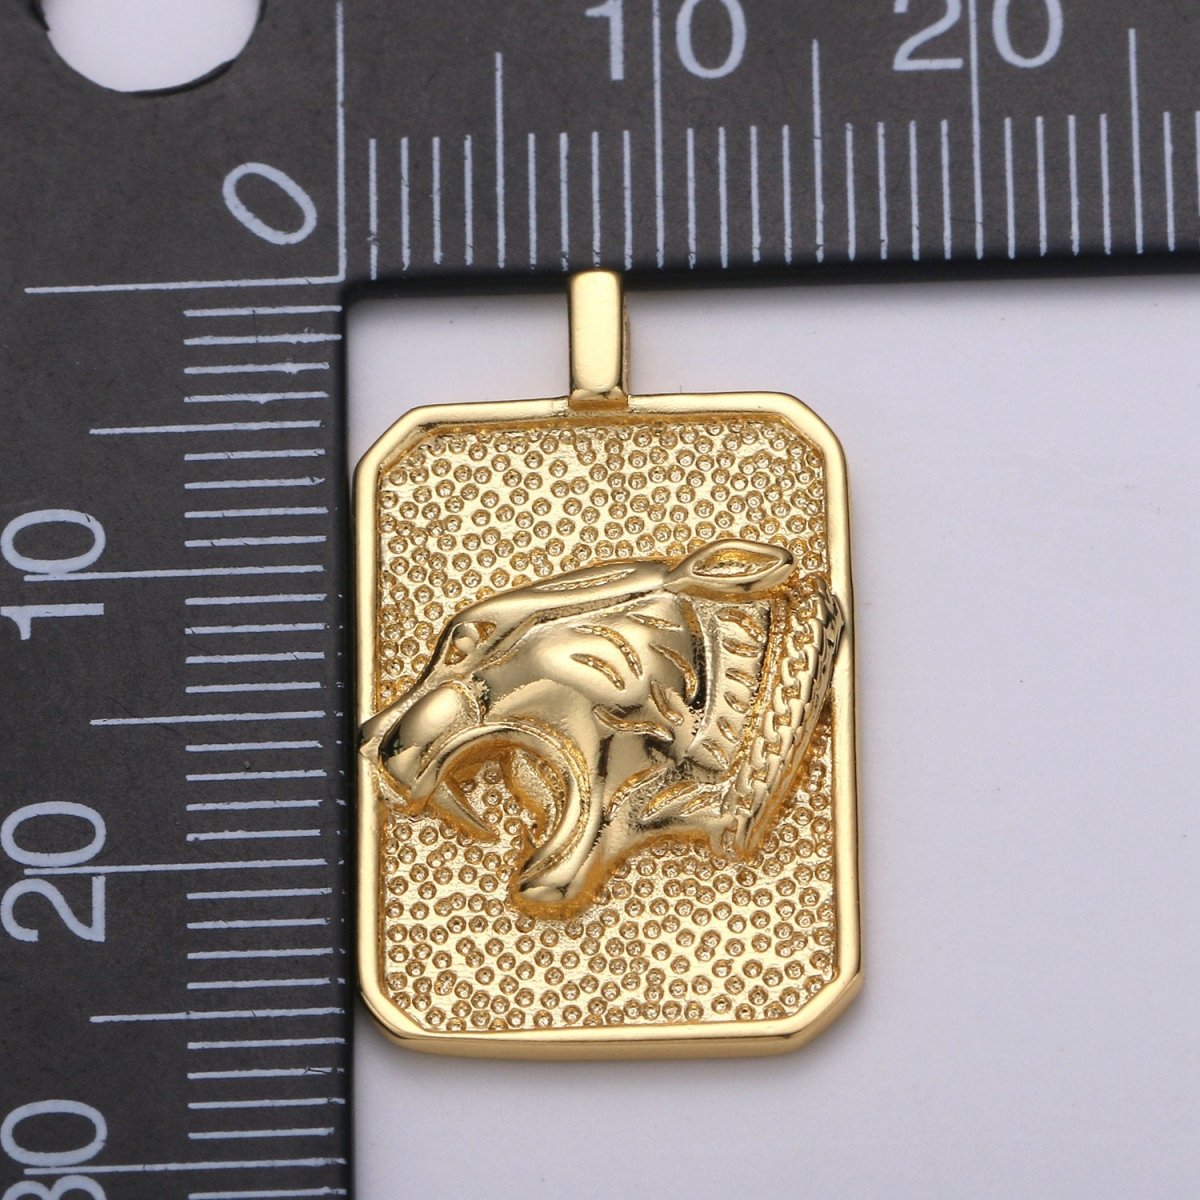 Gold Tag Cat Charm Gold Filled Medallion, Thunder Cat Pendant Animal Necklace Charm for Statement Necklace Component Men Unisex Jewelry J-027 - DLUXCA